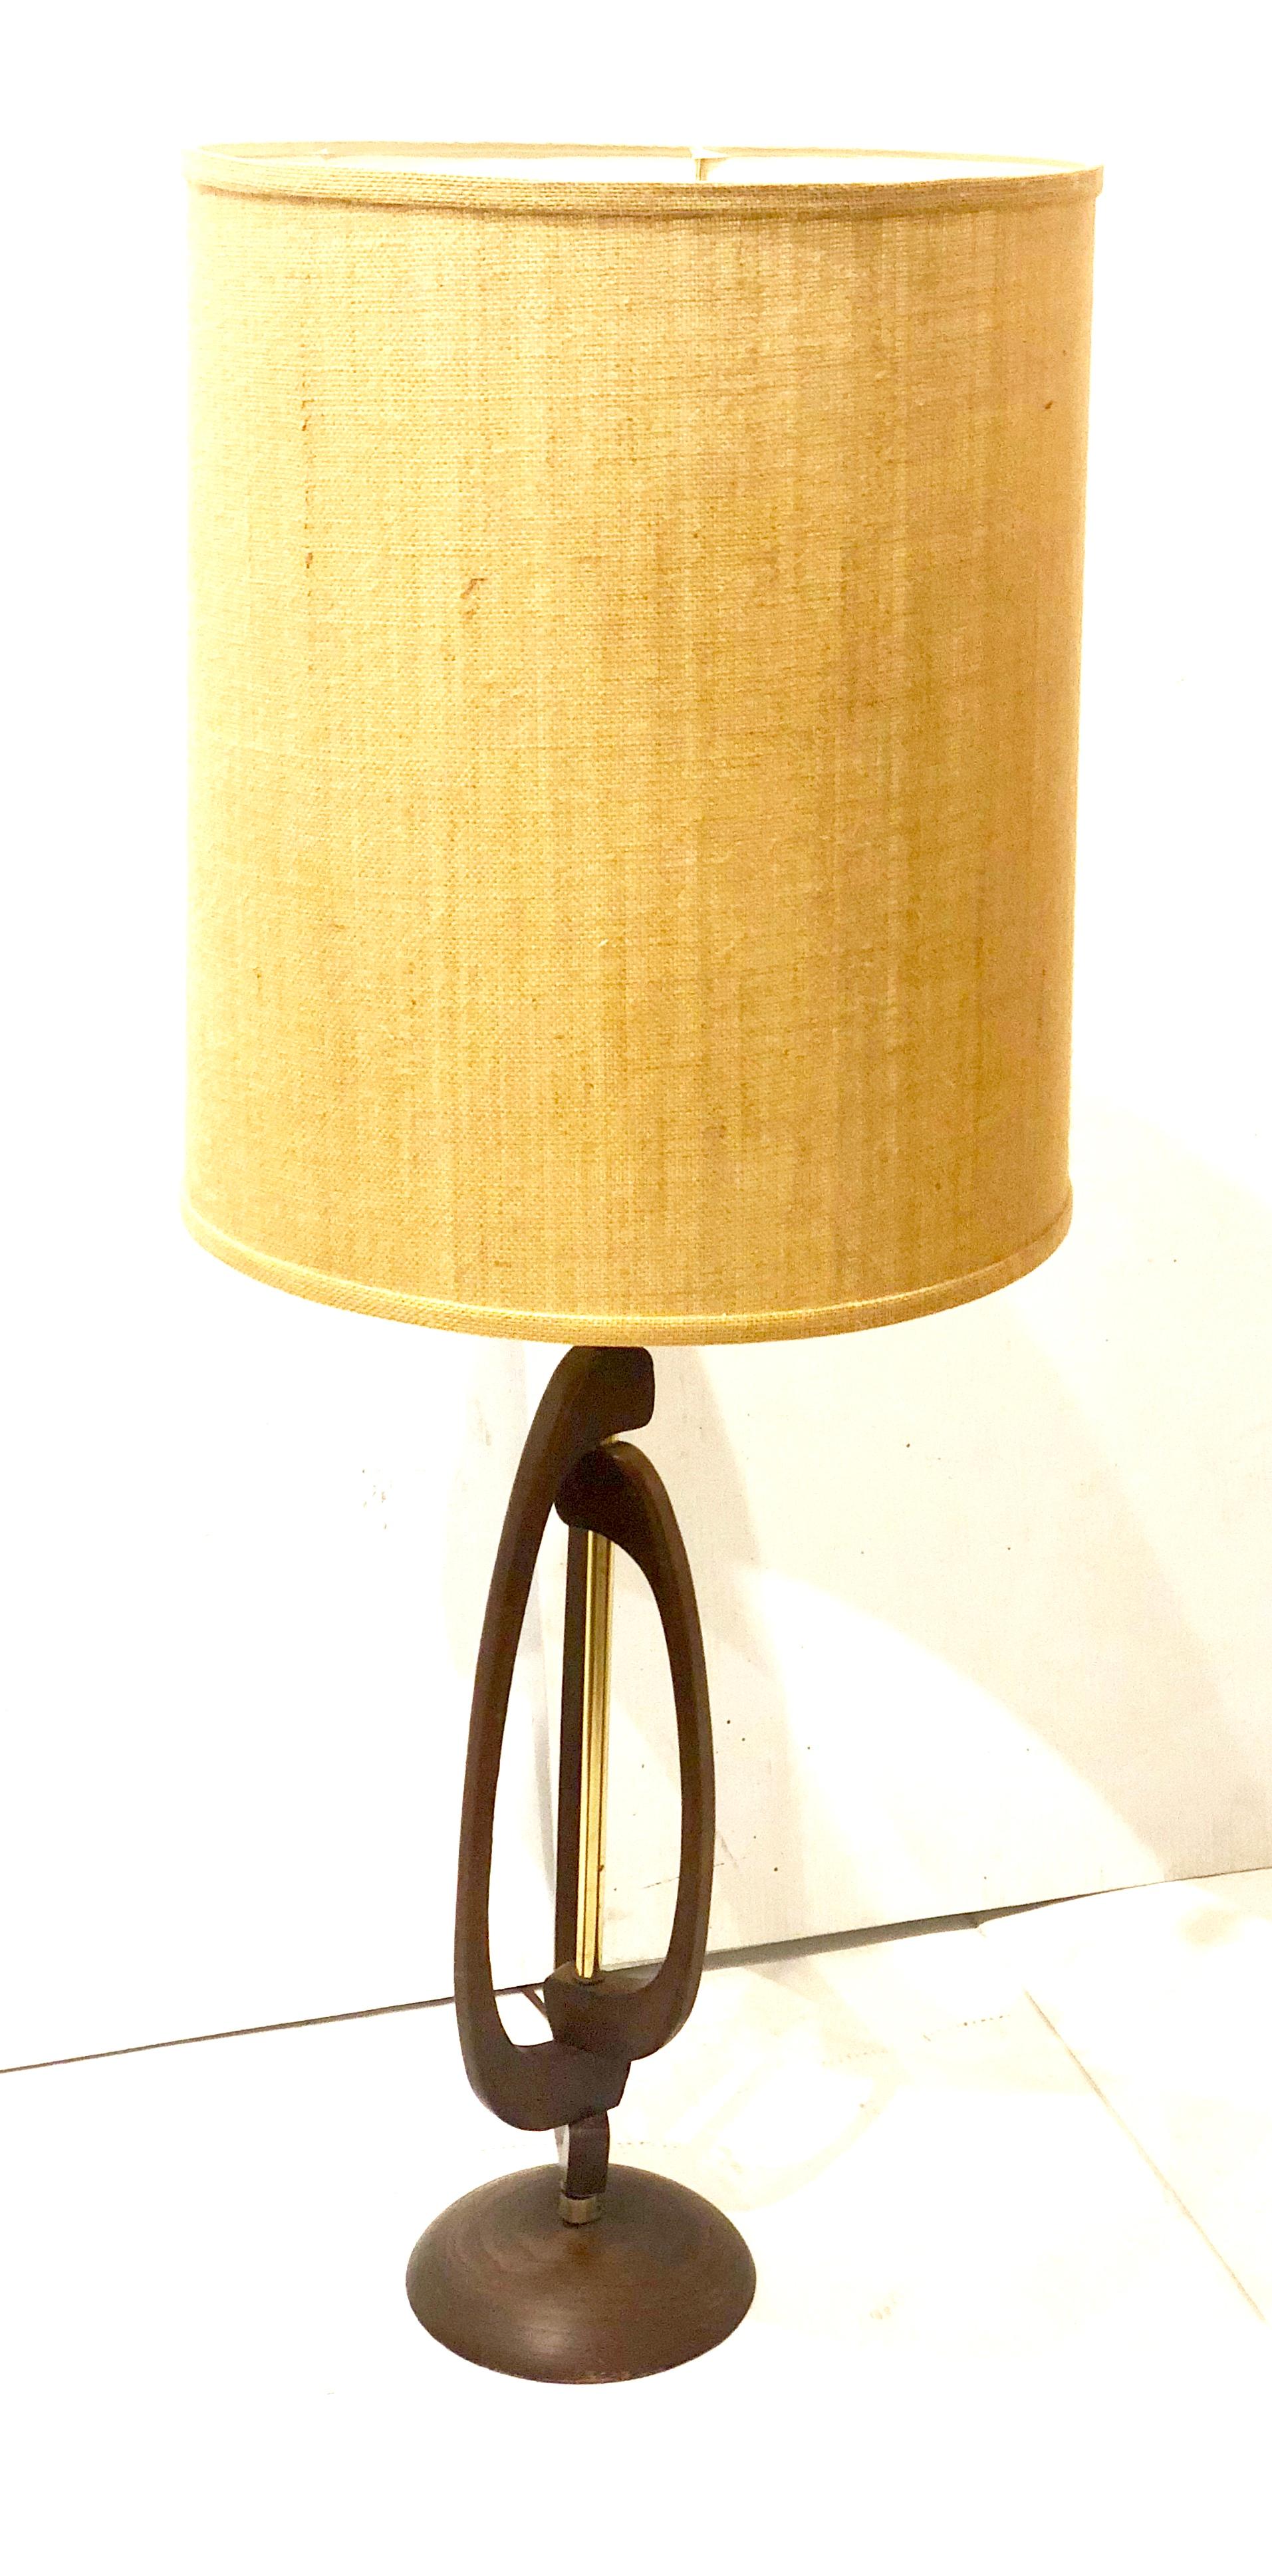 American Pair of Mid-Century Modern Table Lamps by Modeline